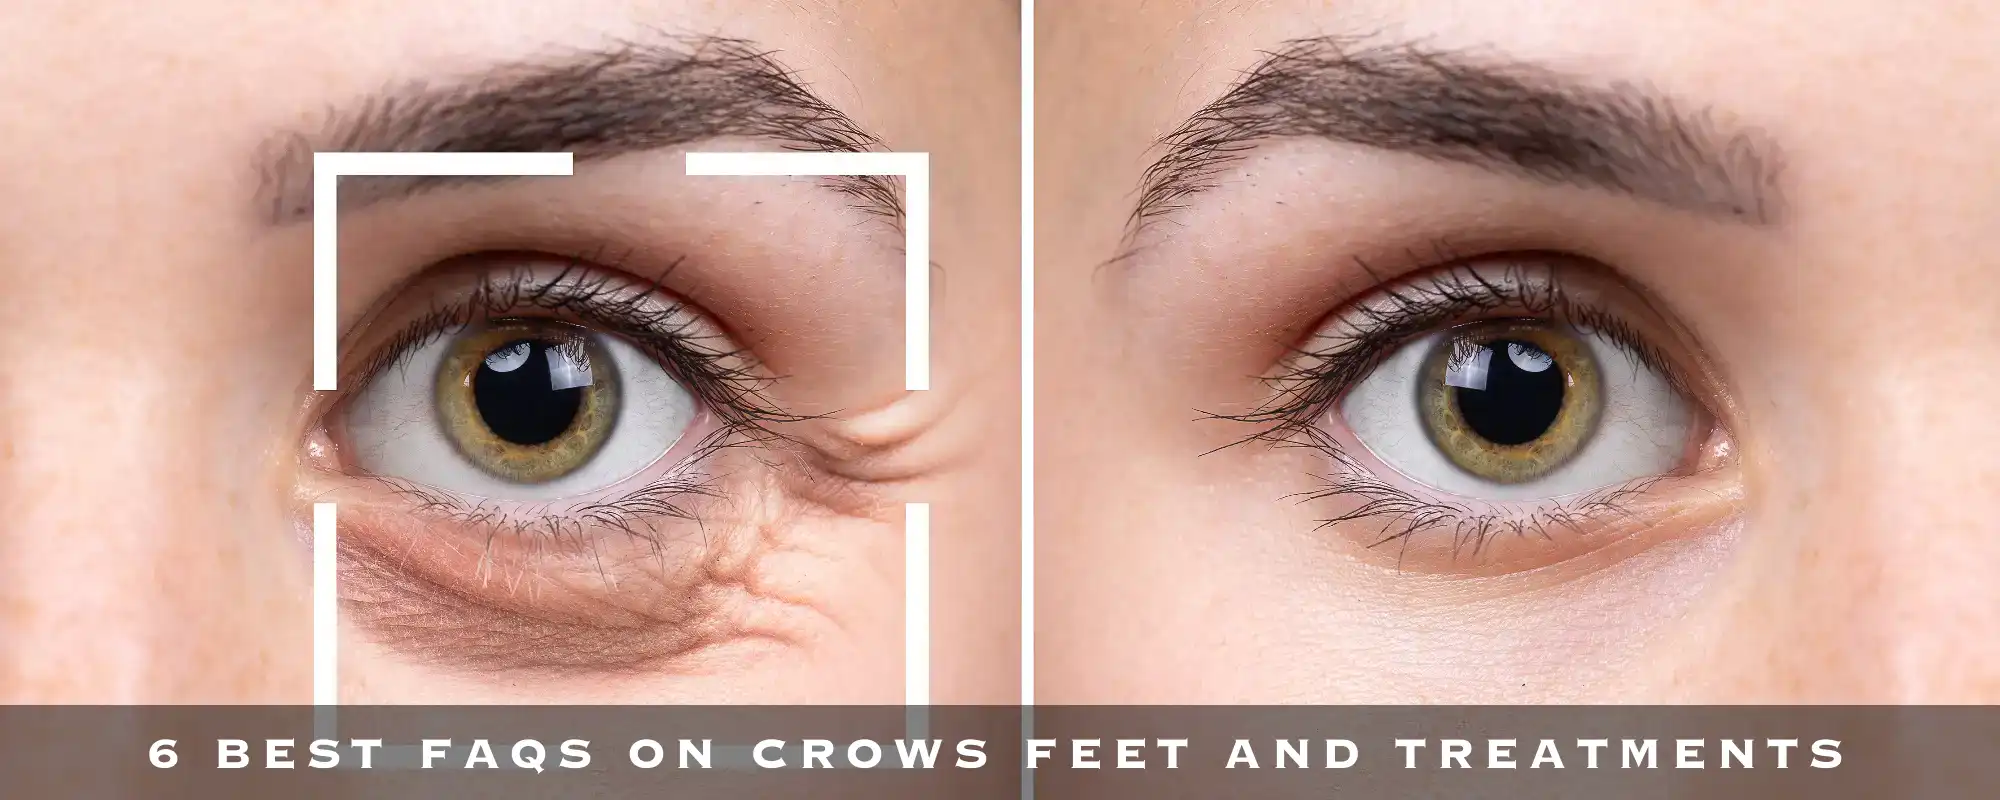 6 BEST FAQS ON CROWS FEET AND TREATMENTS